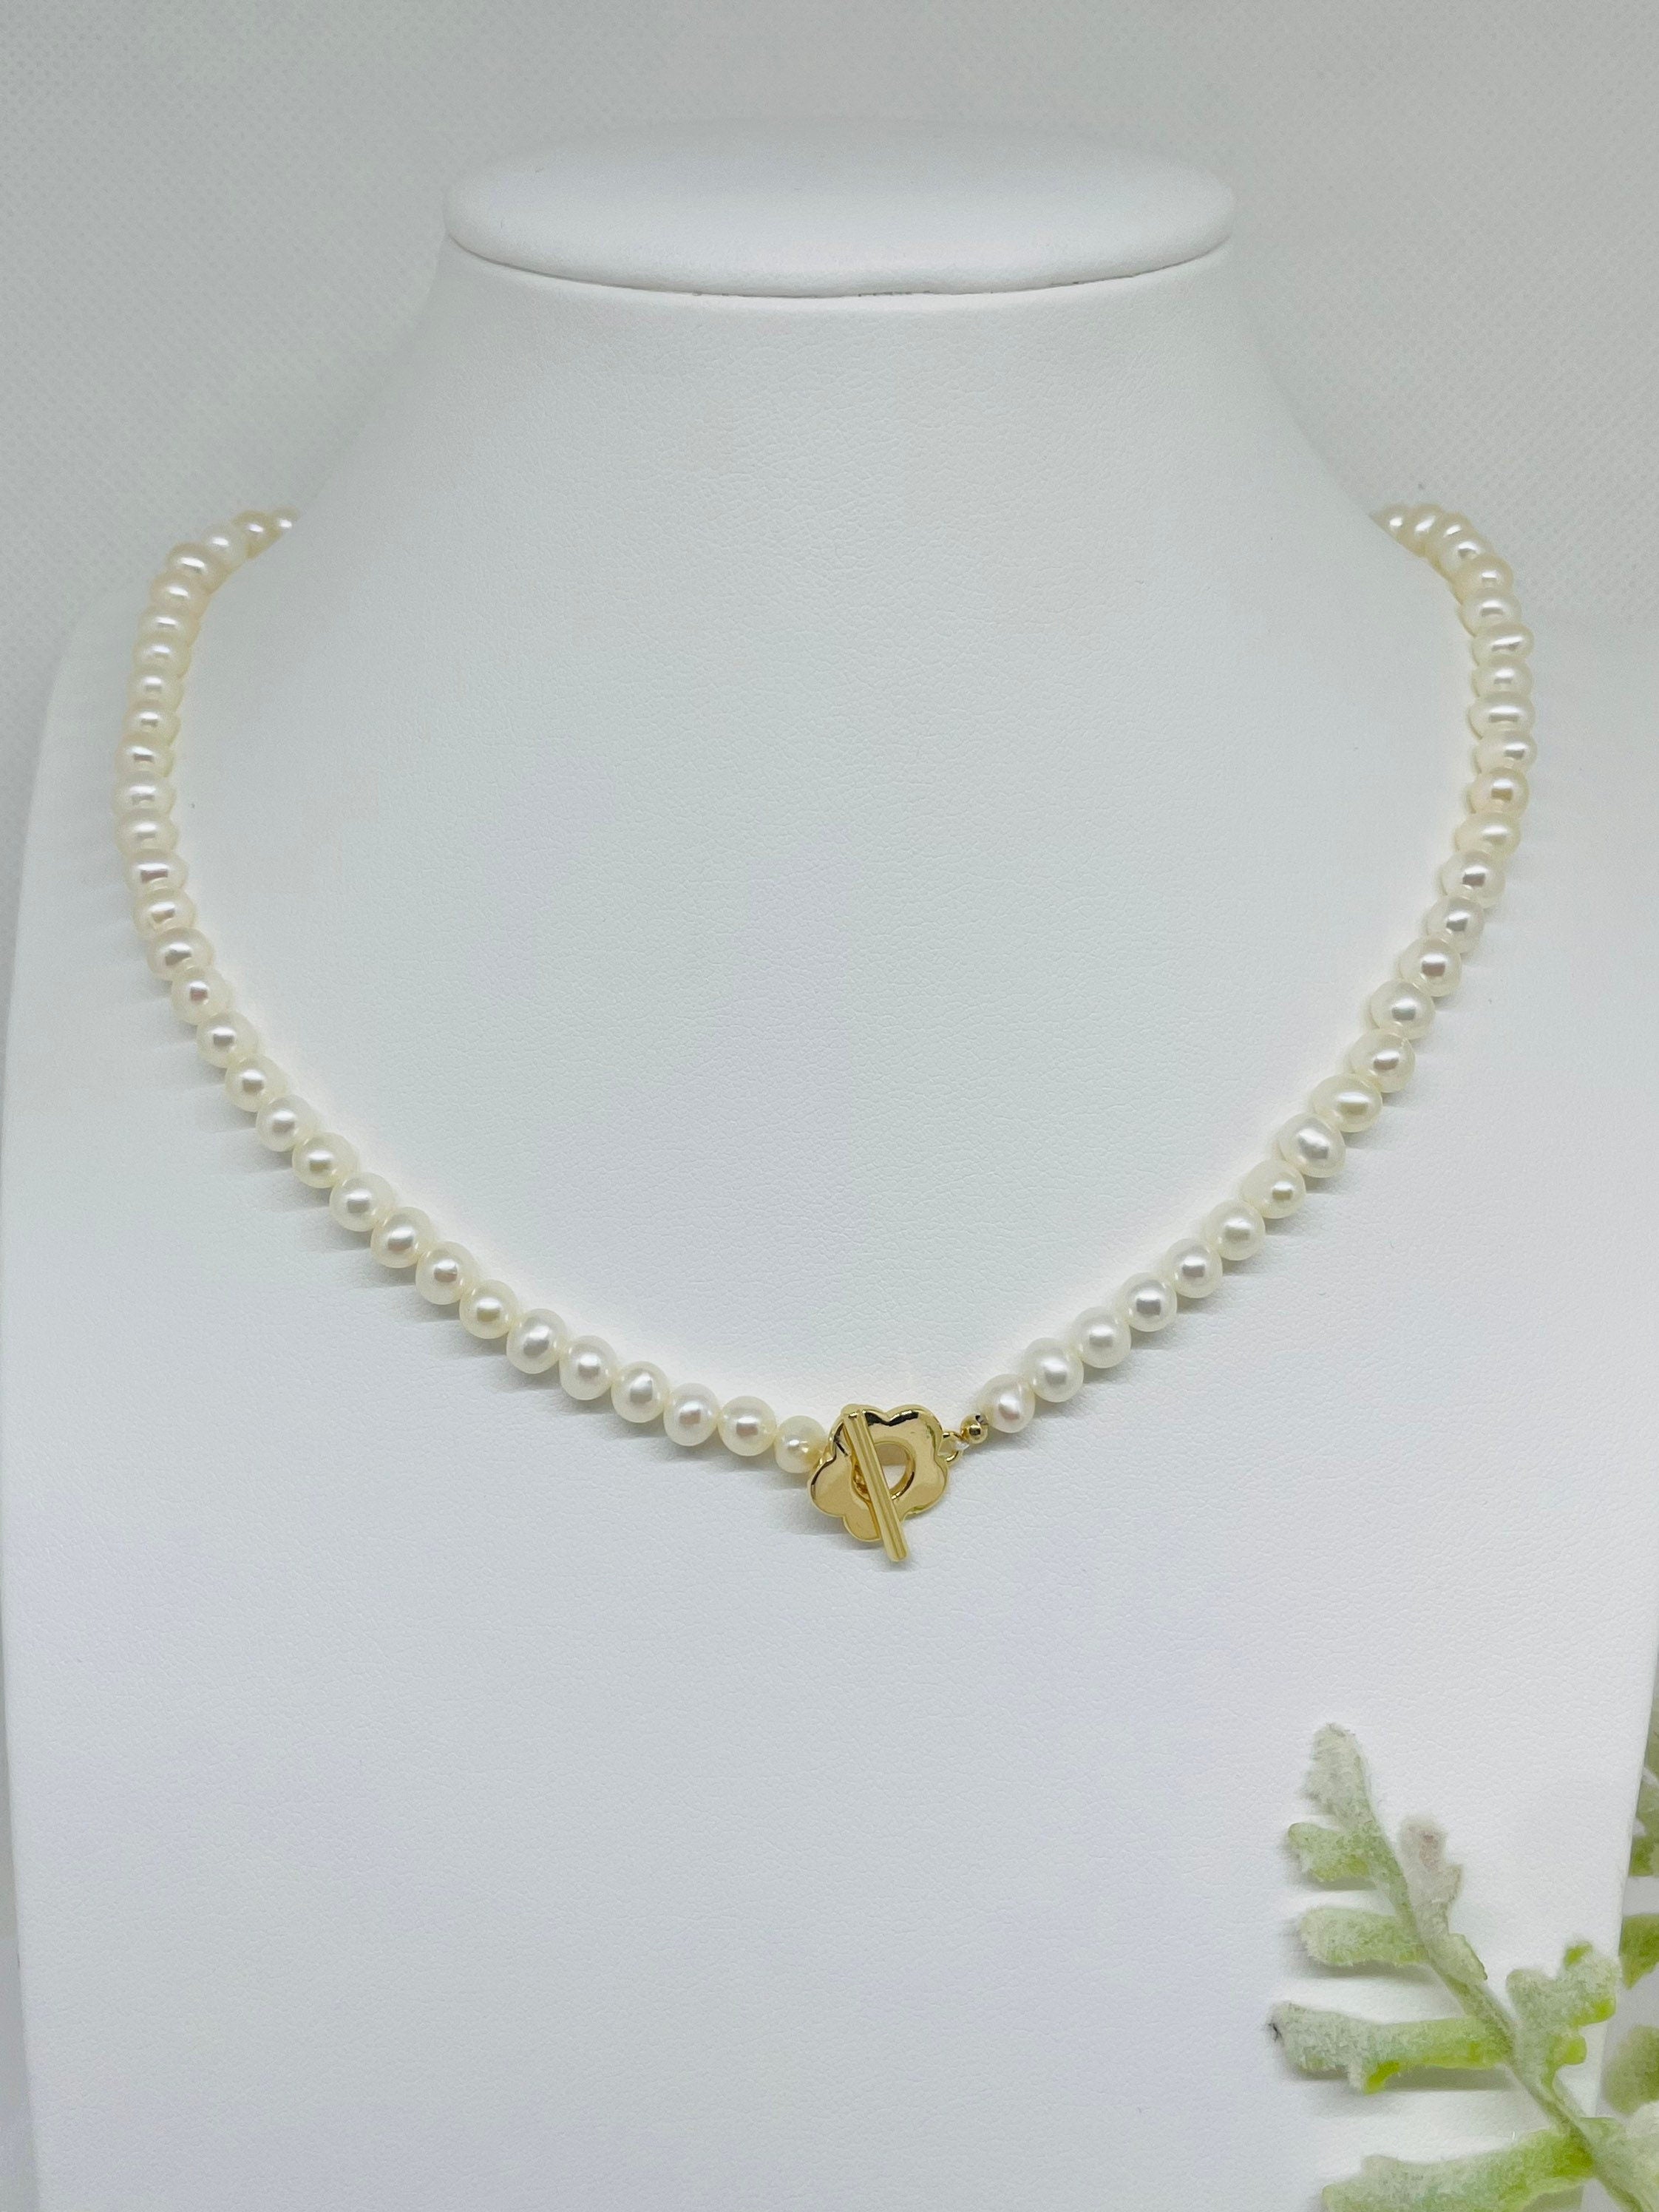 Freshwater Pearl Necklace - Choker Style